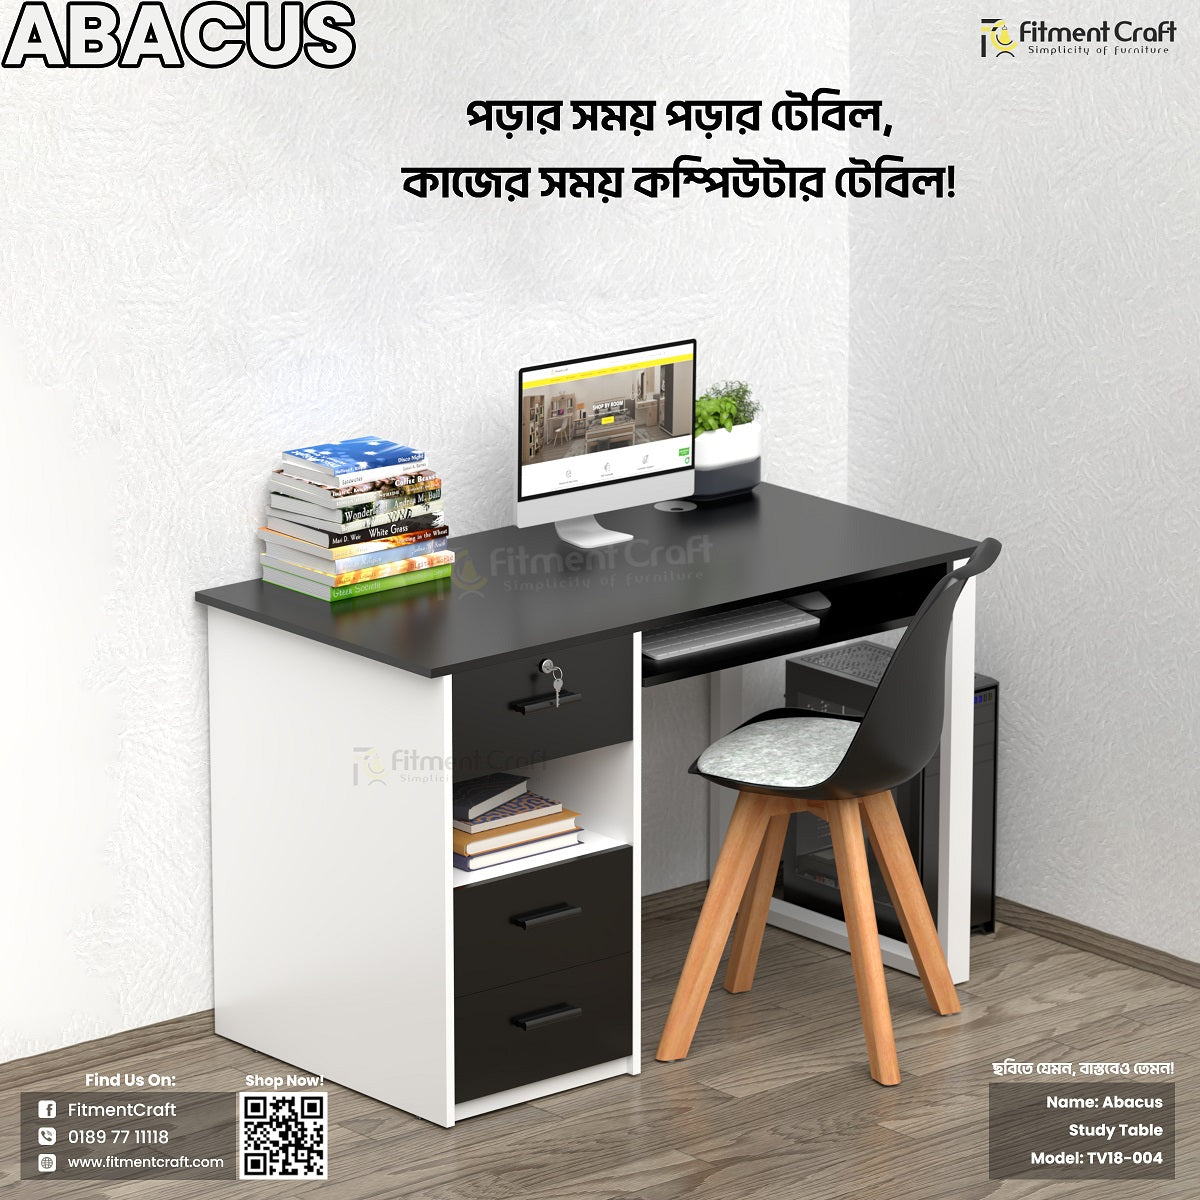 Abacus Table | TV18-004